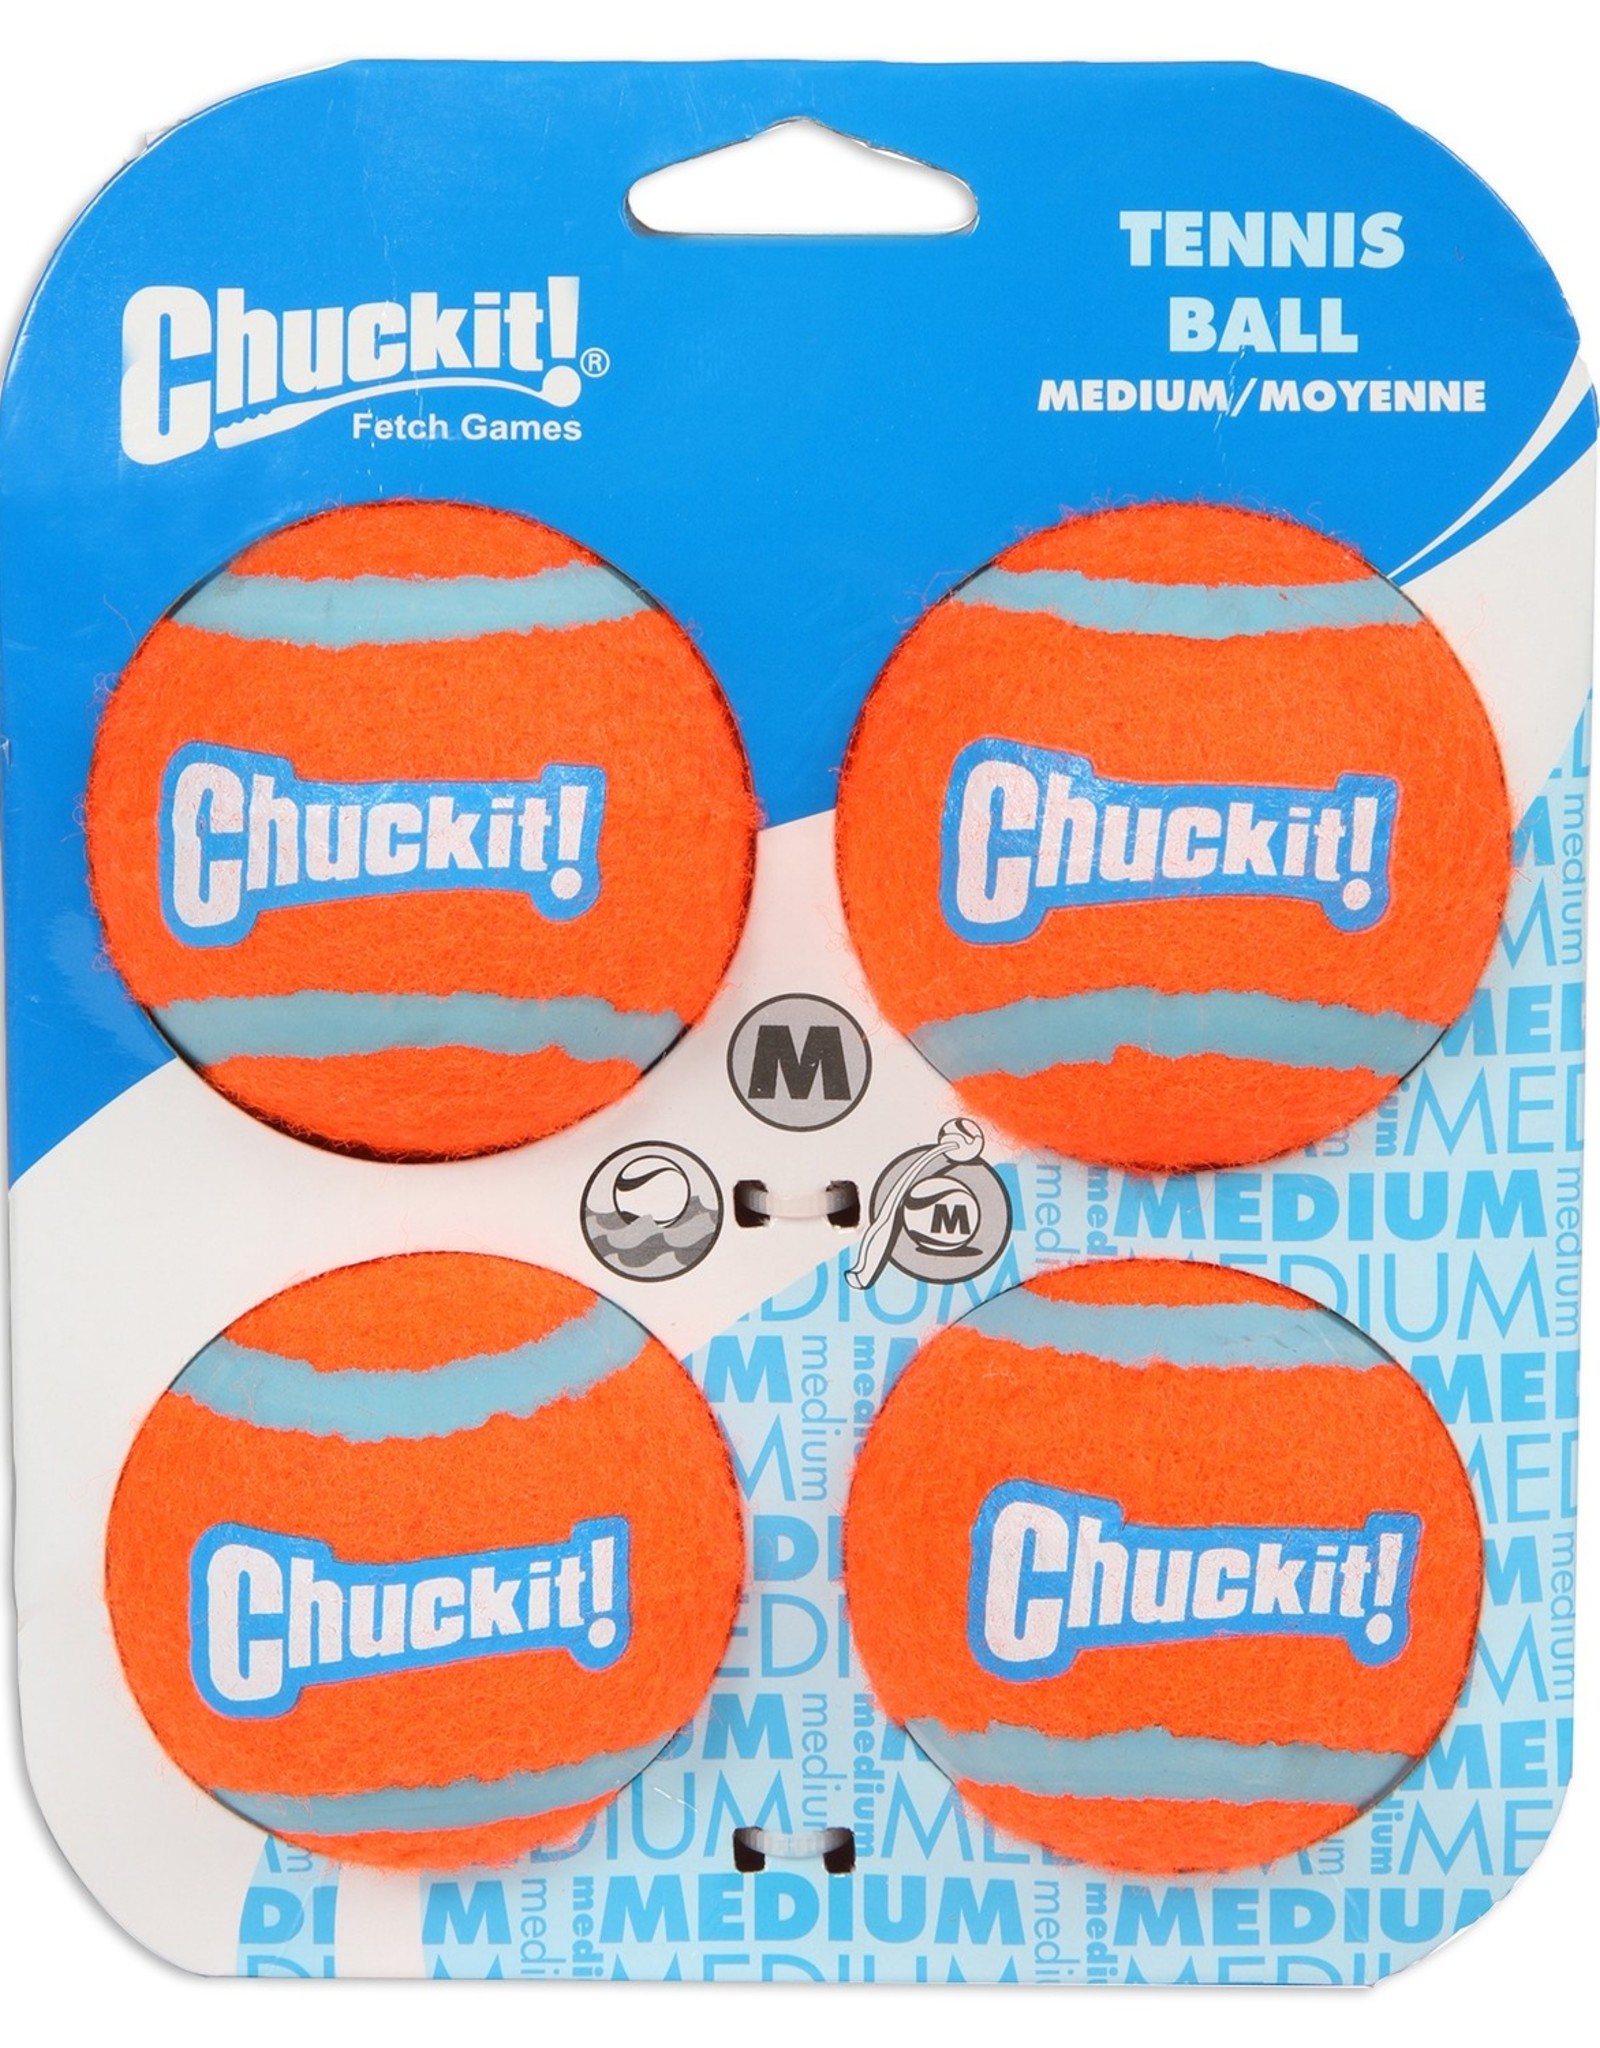 CHUCK IT TENNIS BALL 4CT discontinued pvff